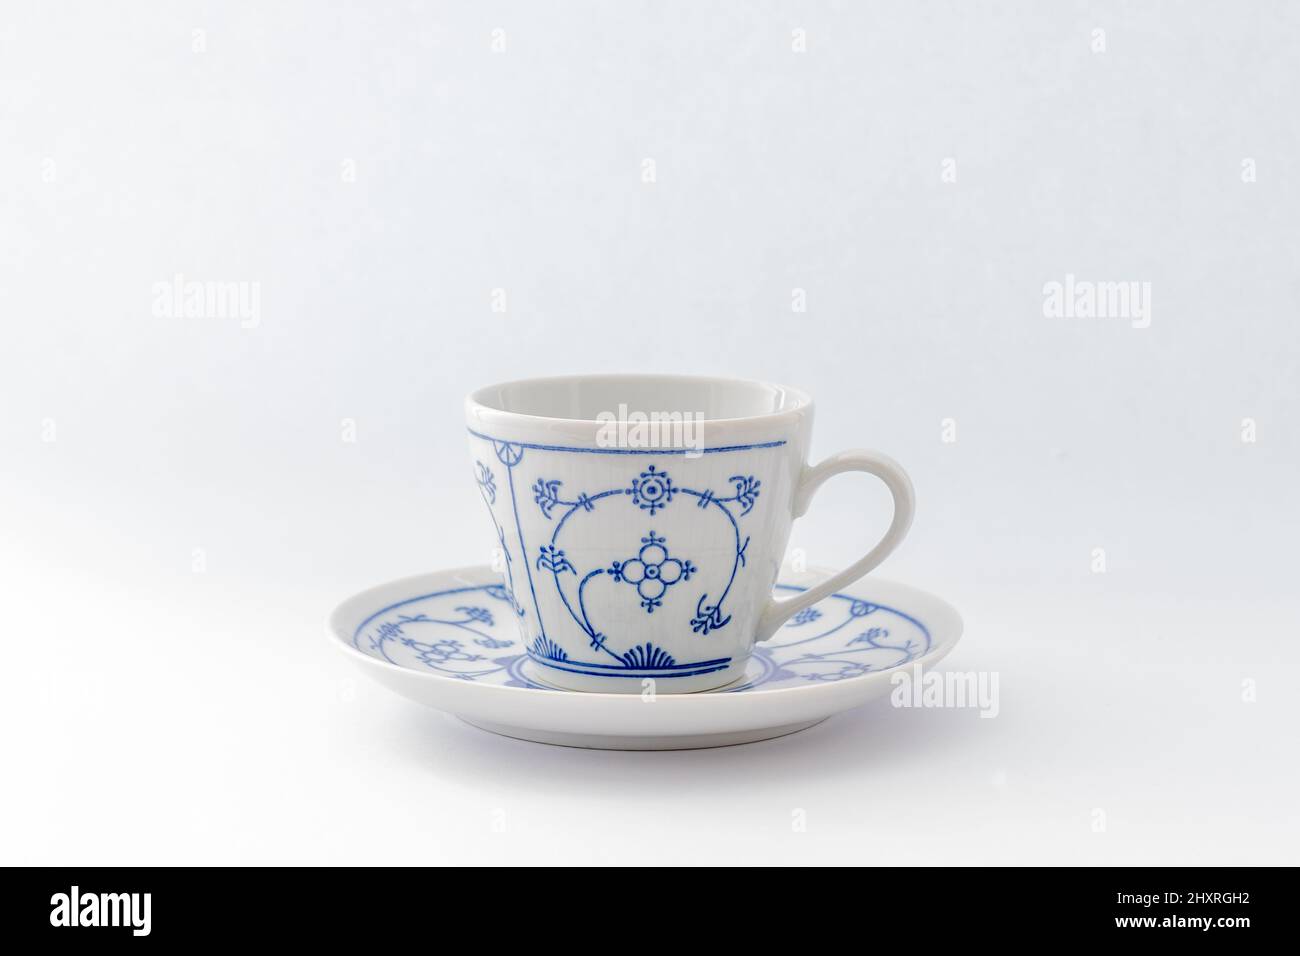 Blue white china teacup and saucer on a white background Stock Photo